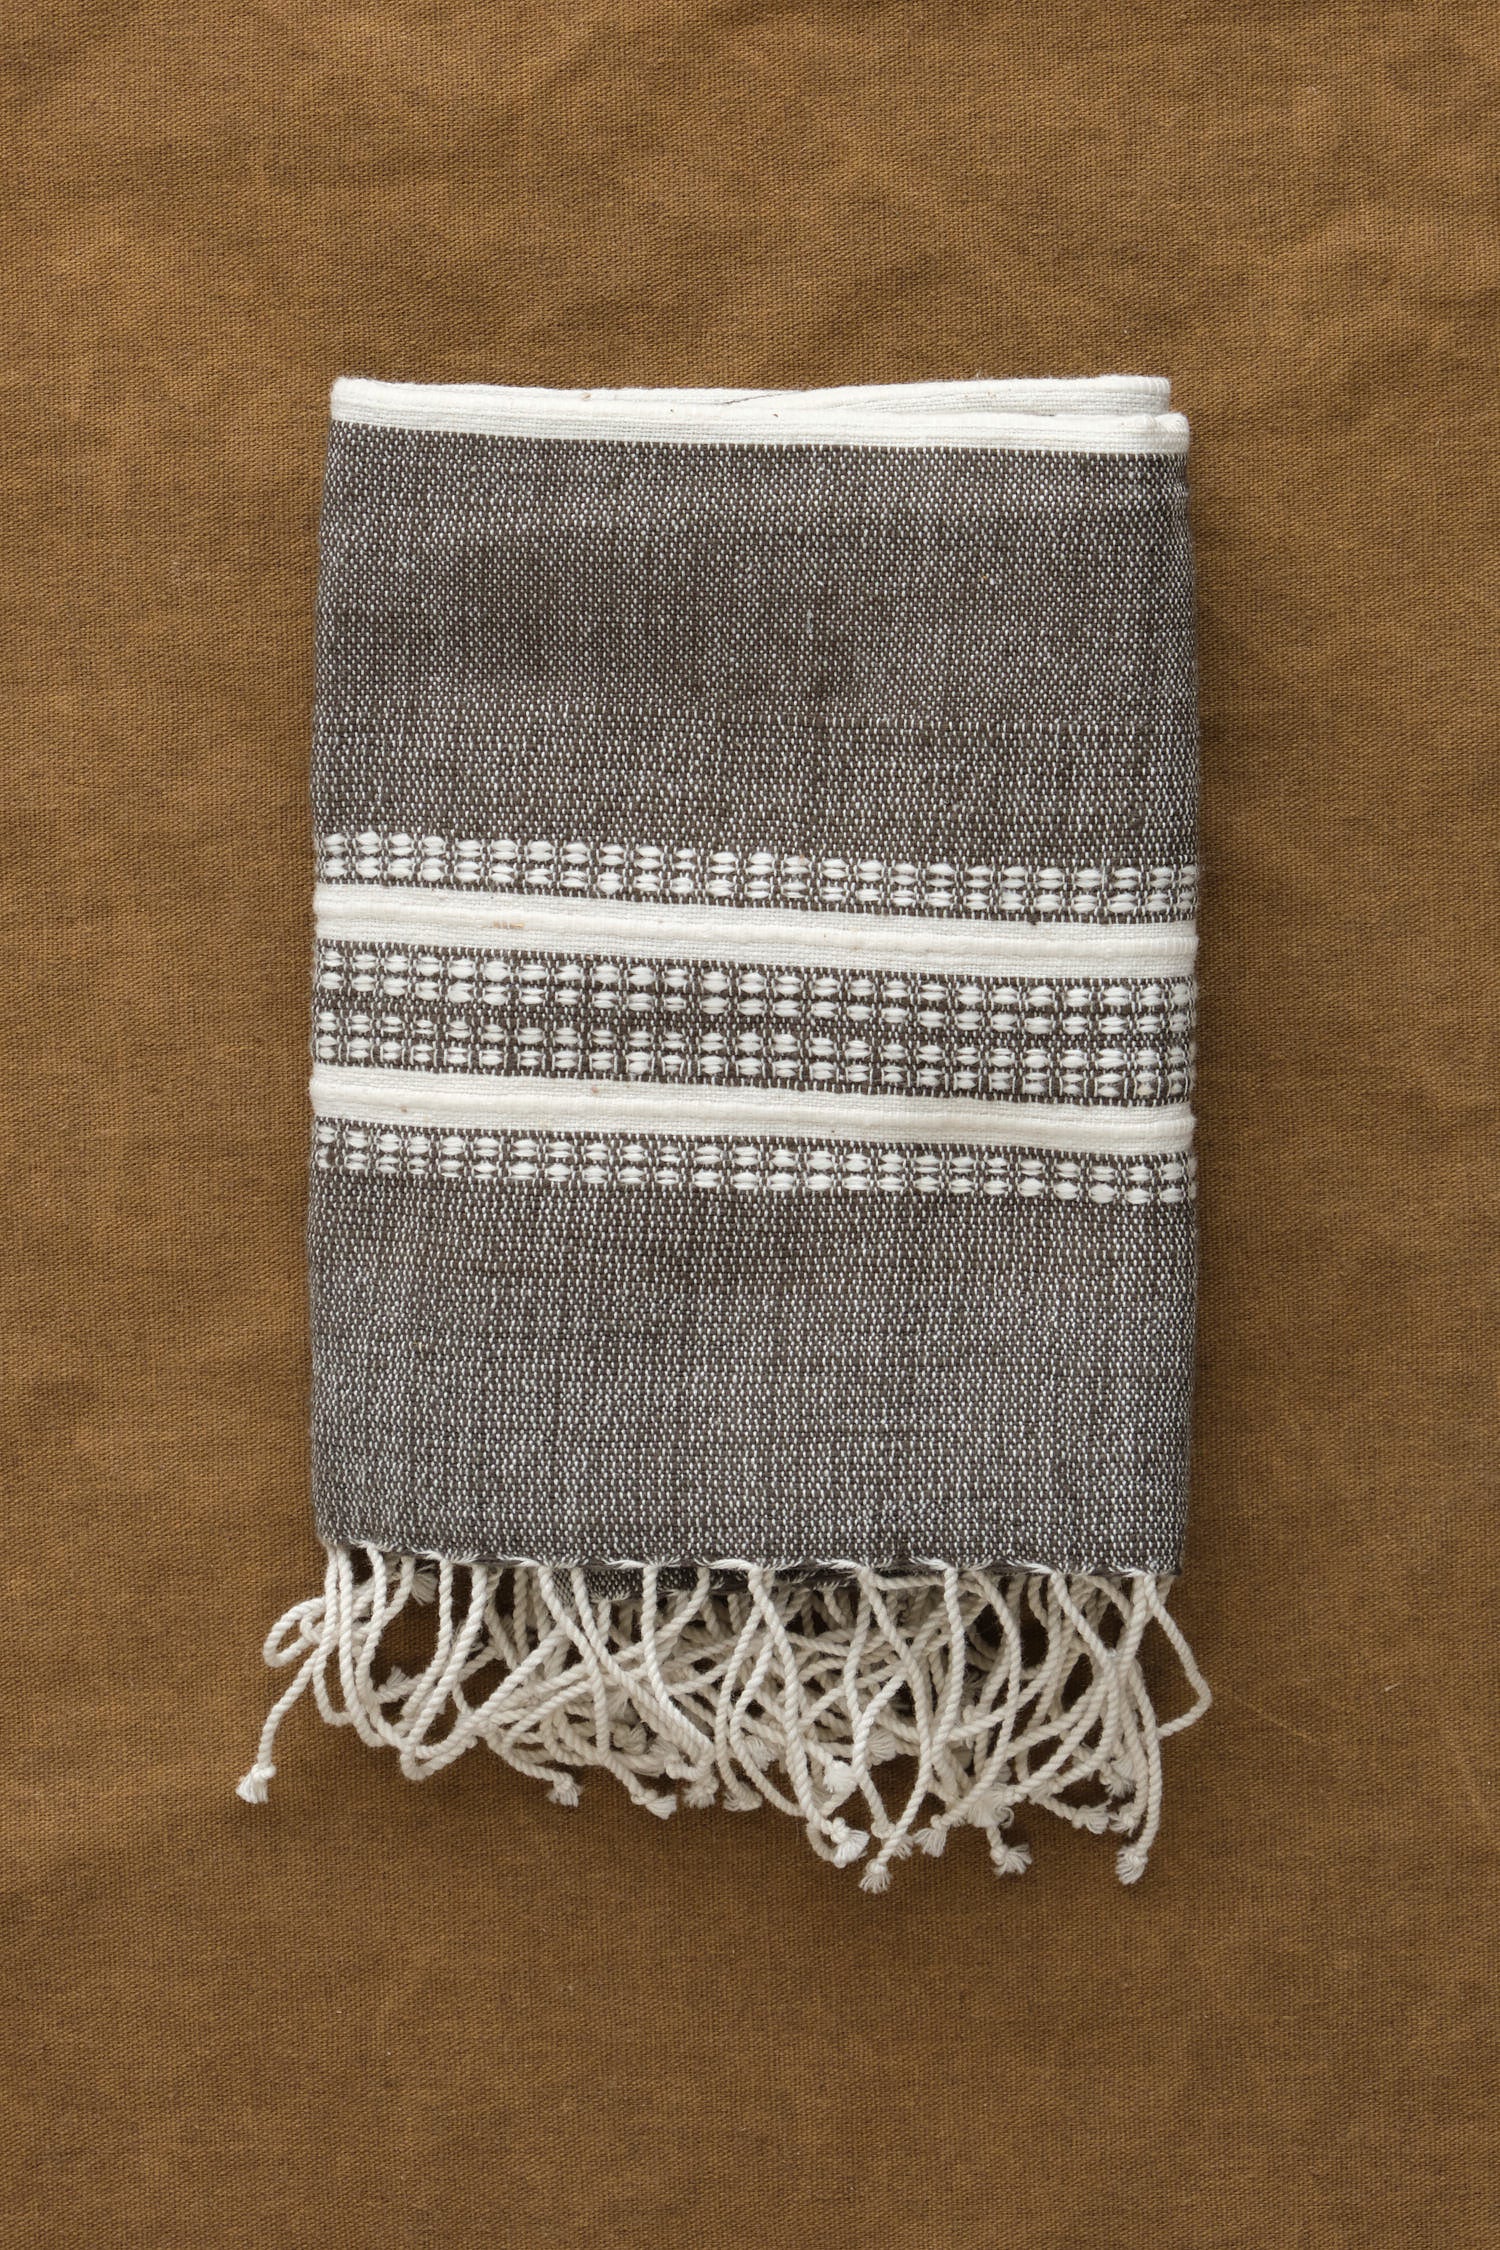 Aden Stripes Hand Towel grey with natural